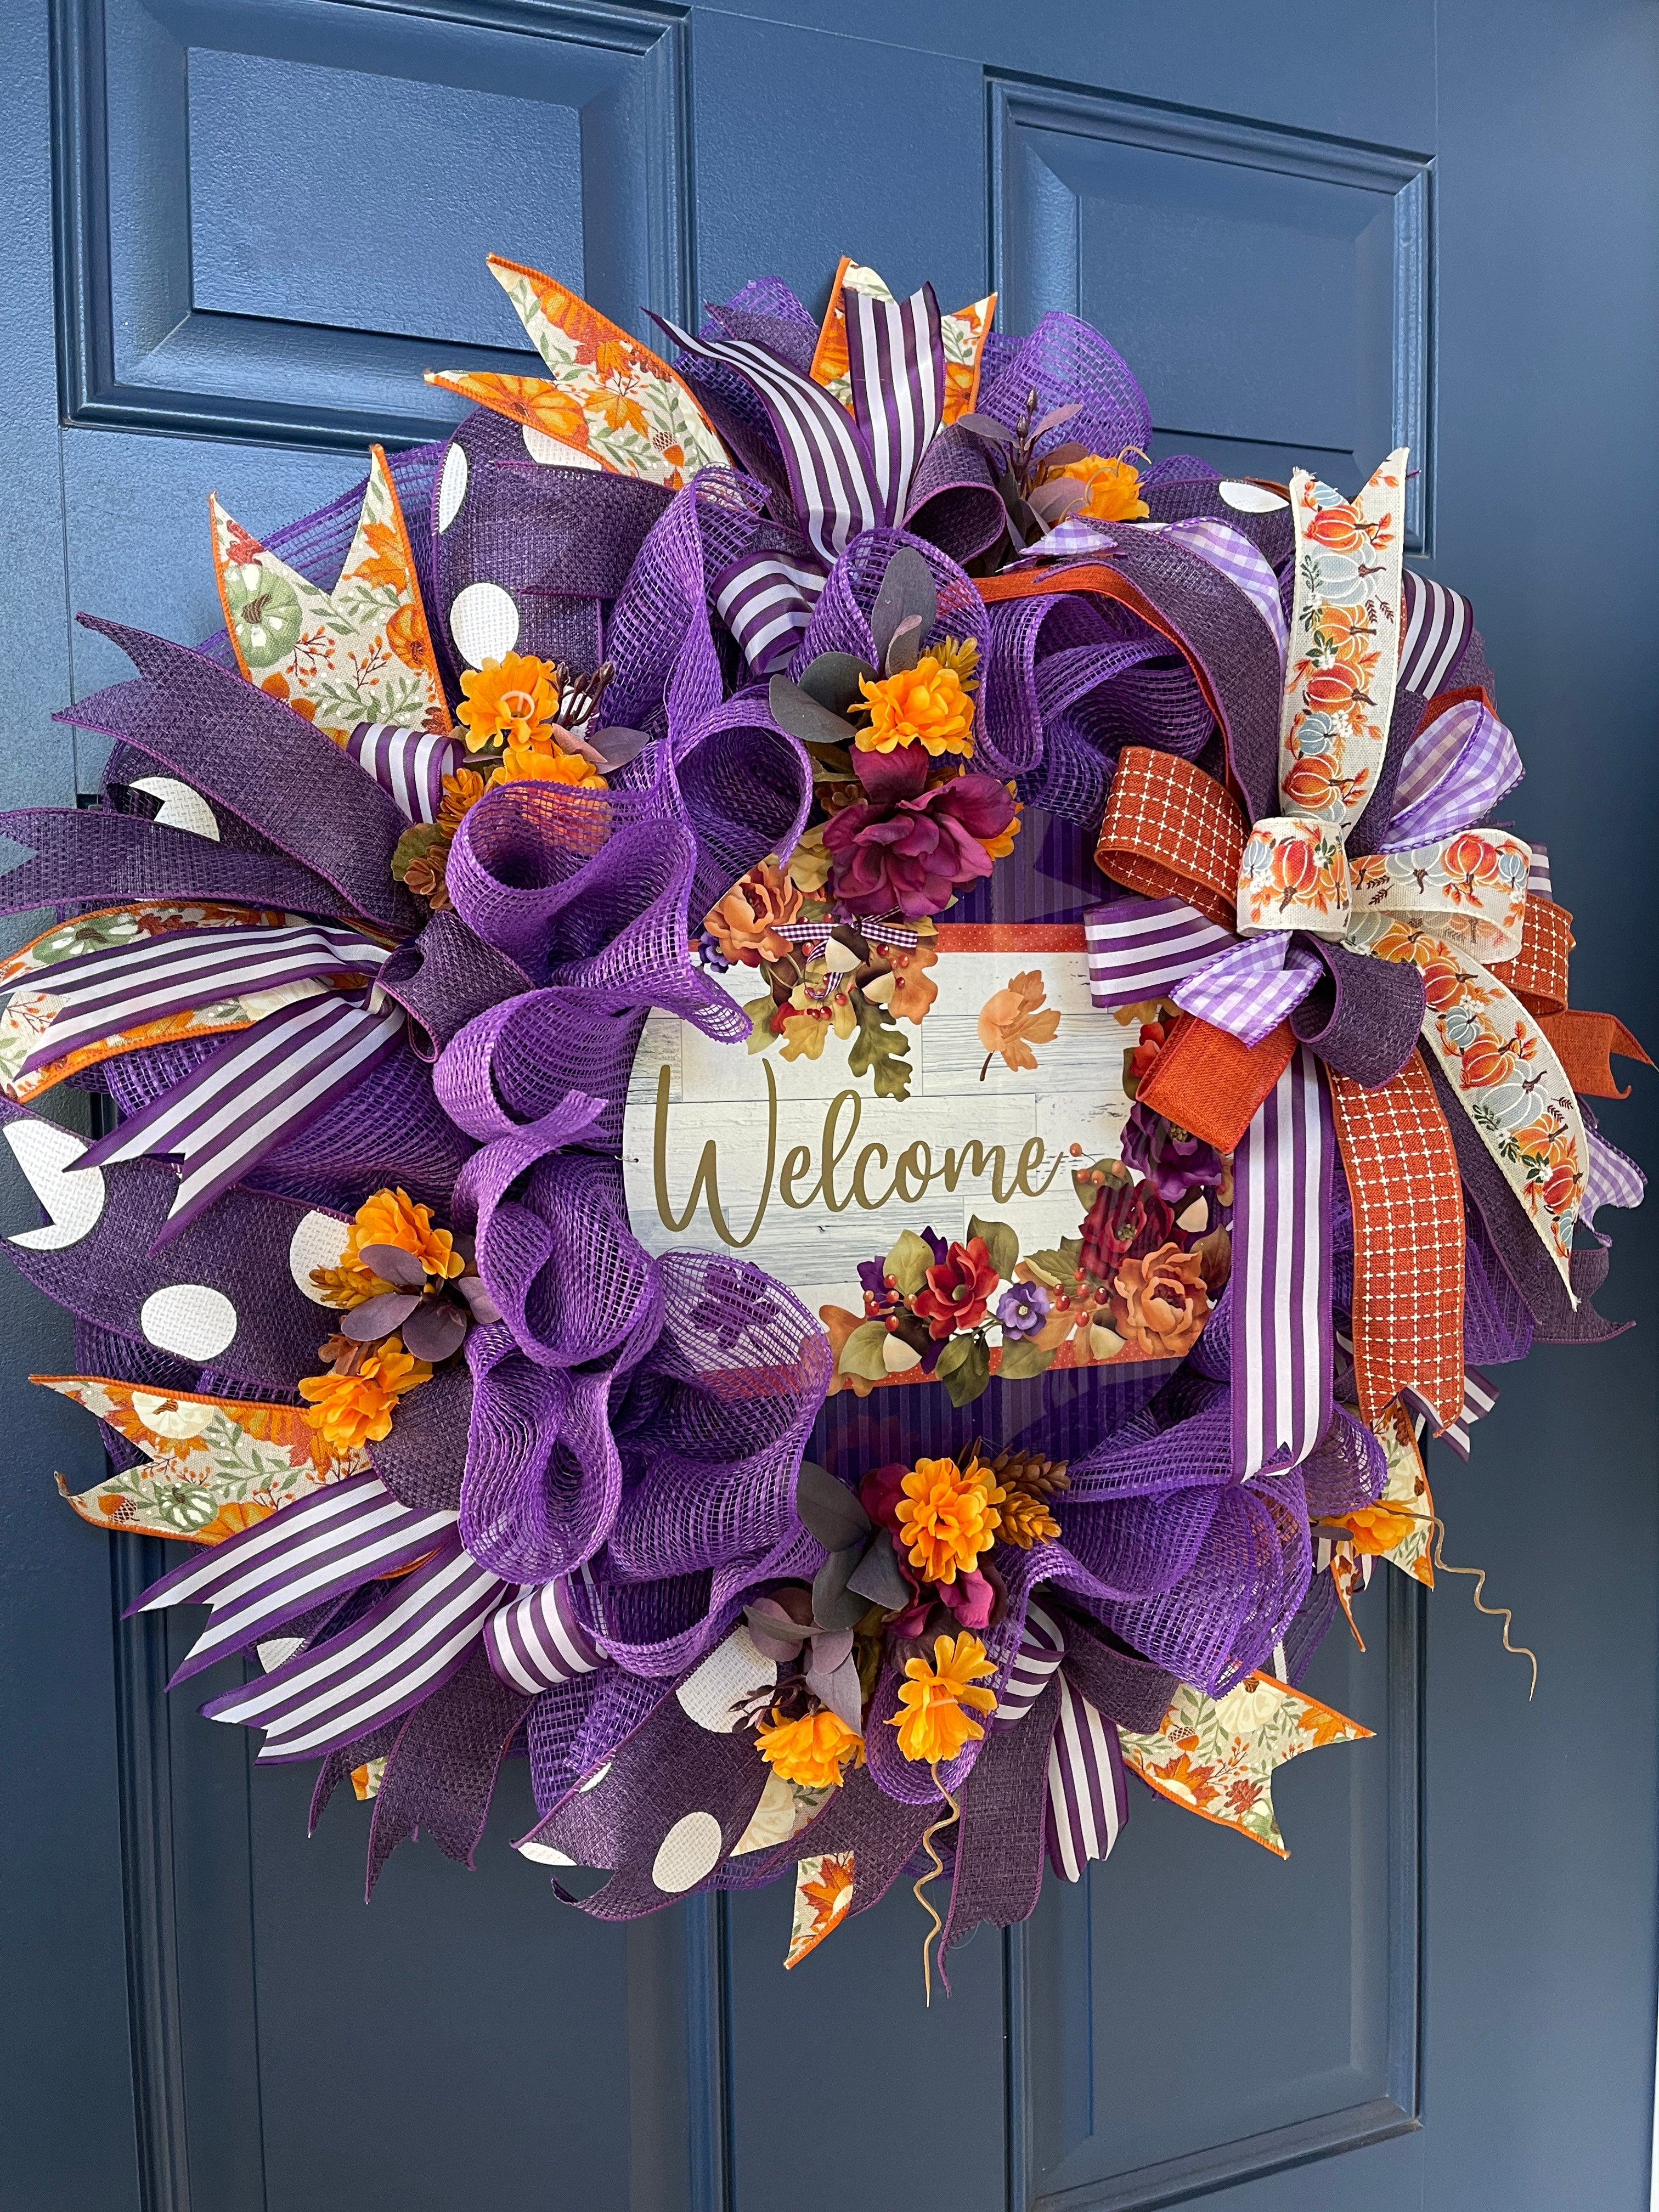 Left Side View of Purple and Orange Deco Mesh and Fall Floral Welcome Wreath on a Blue Door